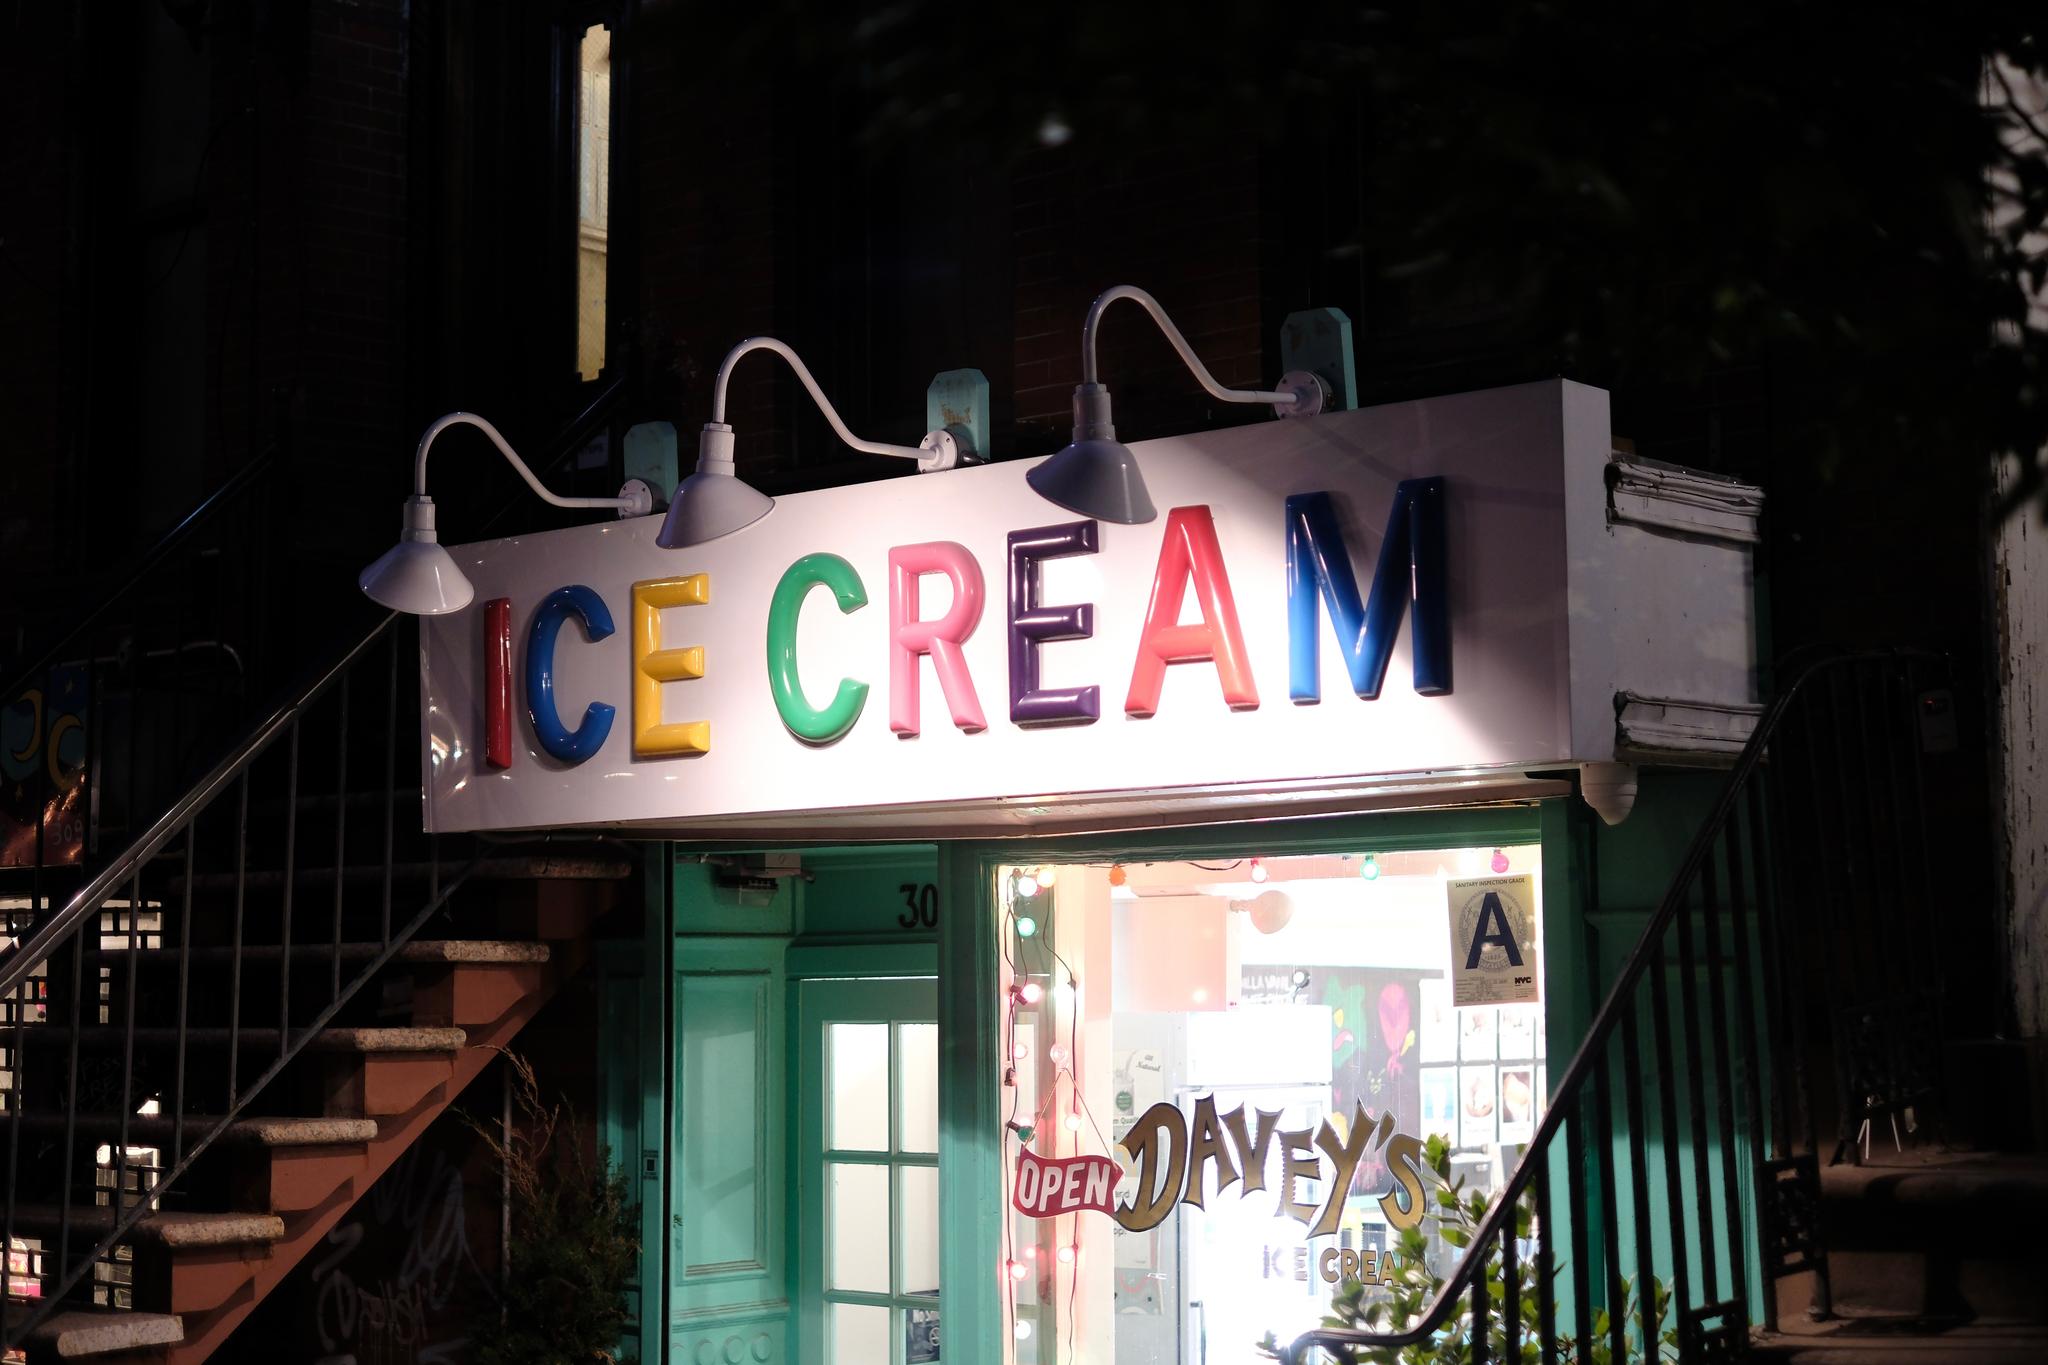 A brightly lit ice cream shop with a colorful sign reading ICE CREAM in large letters, located between two staircases